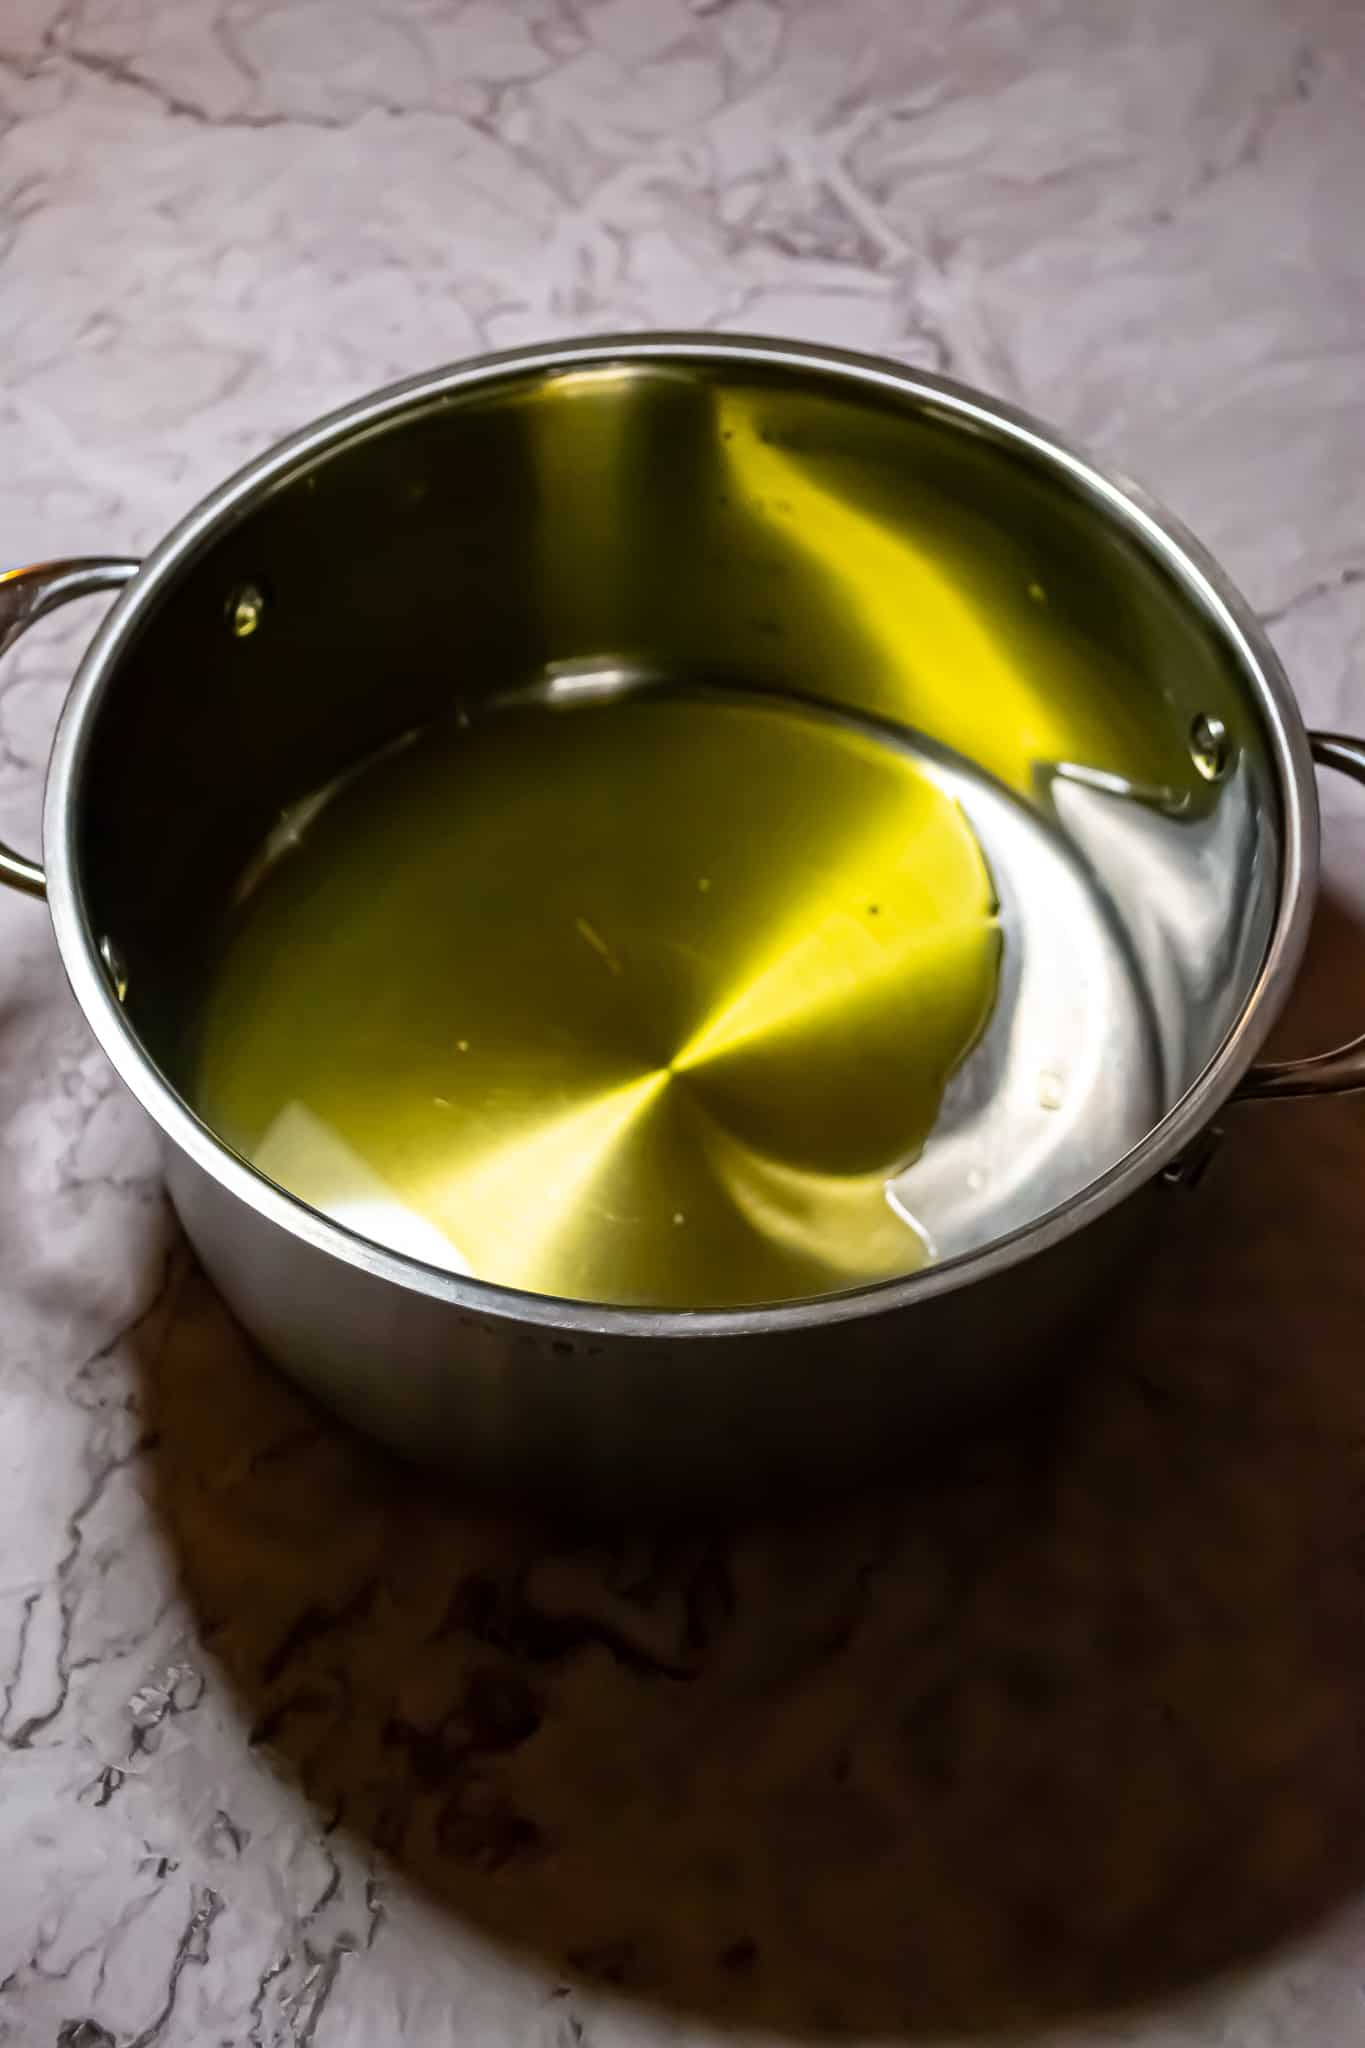 Top view of extra virgin olive oil in a stainless steel soup pot.